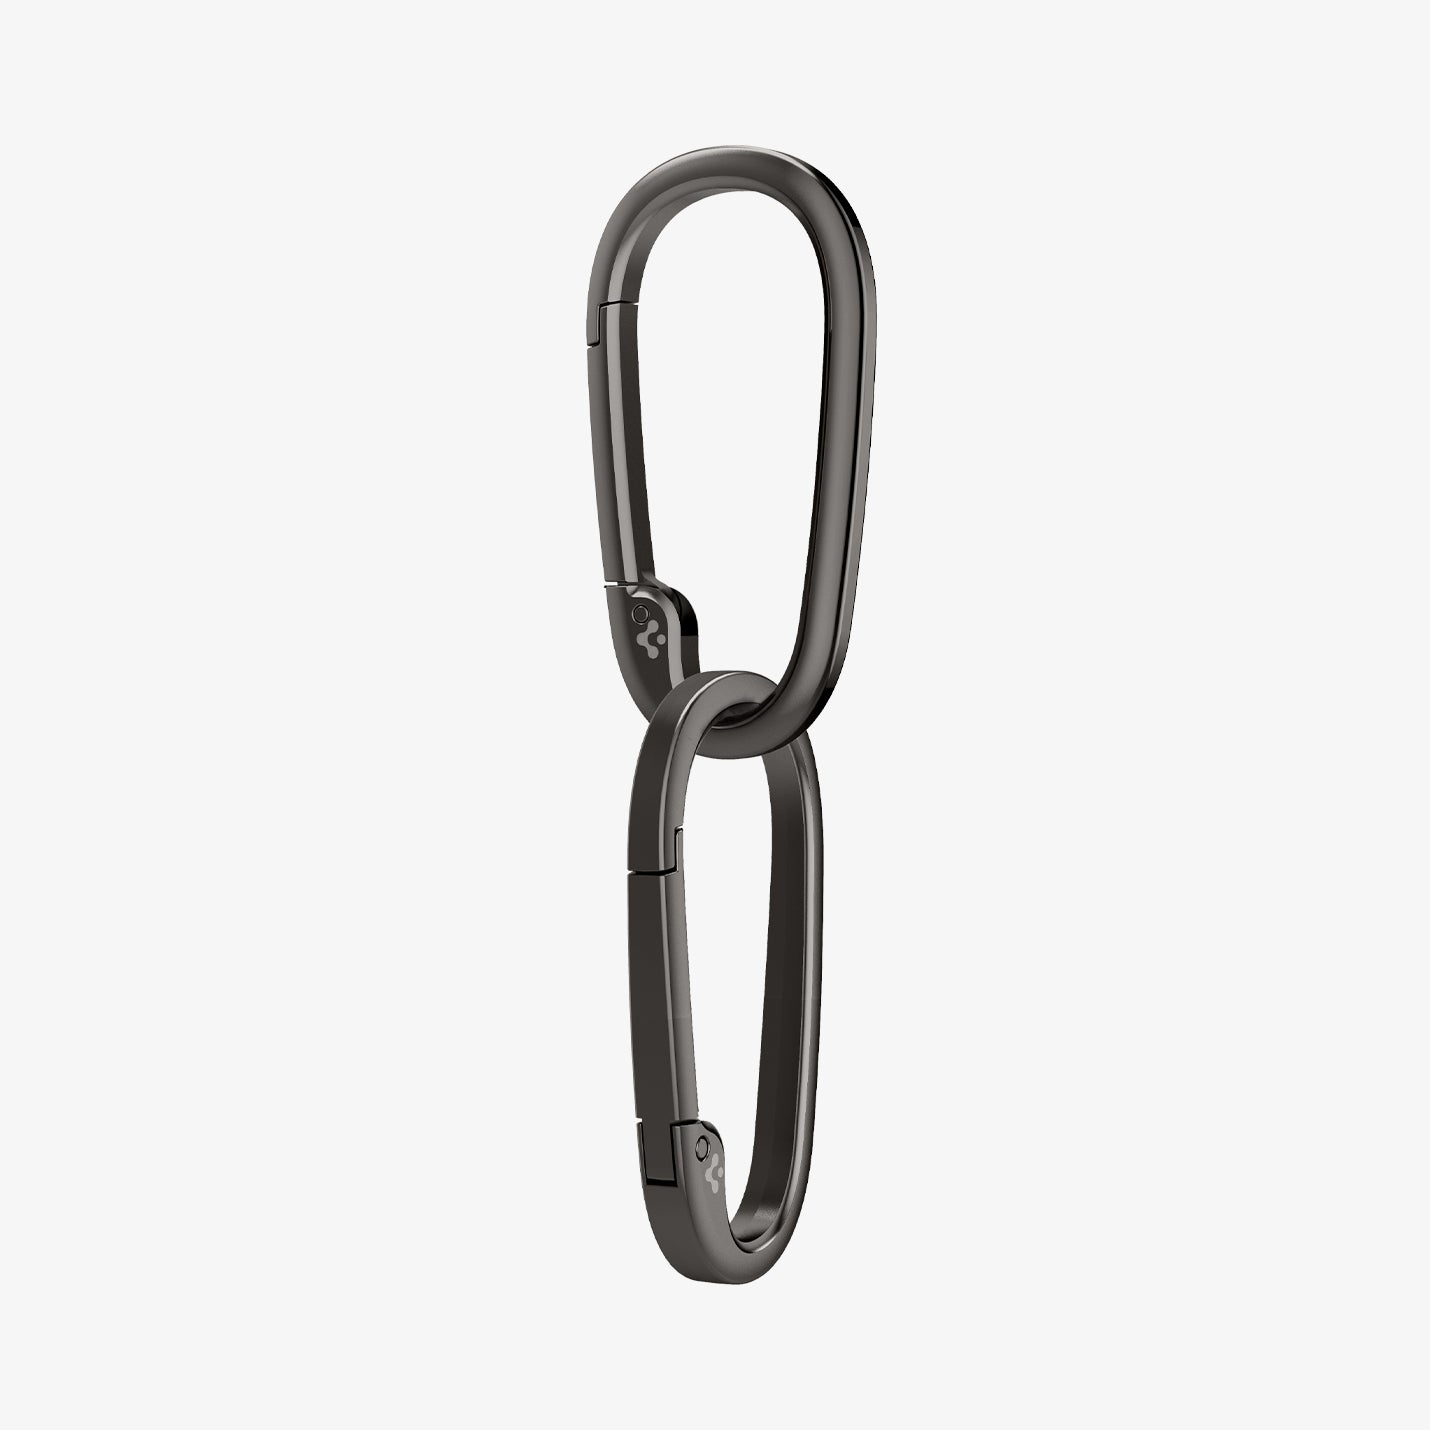 AHP02932 - Carabiner Basic Type in black showing a carabiner attached to another